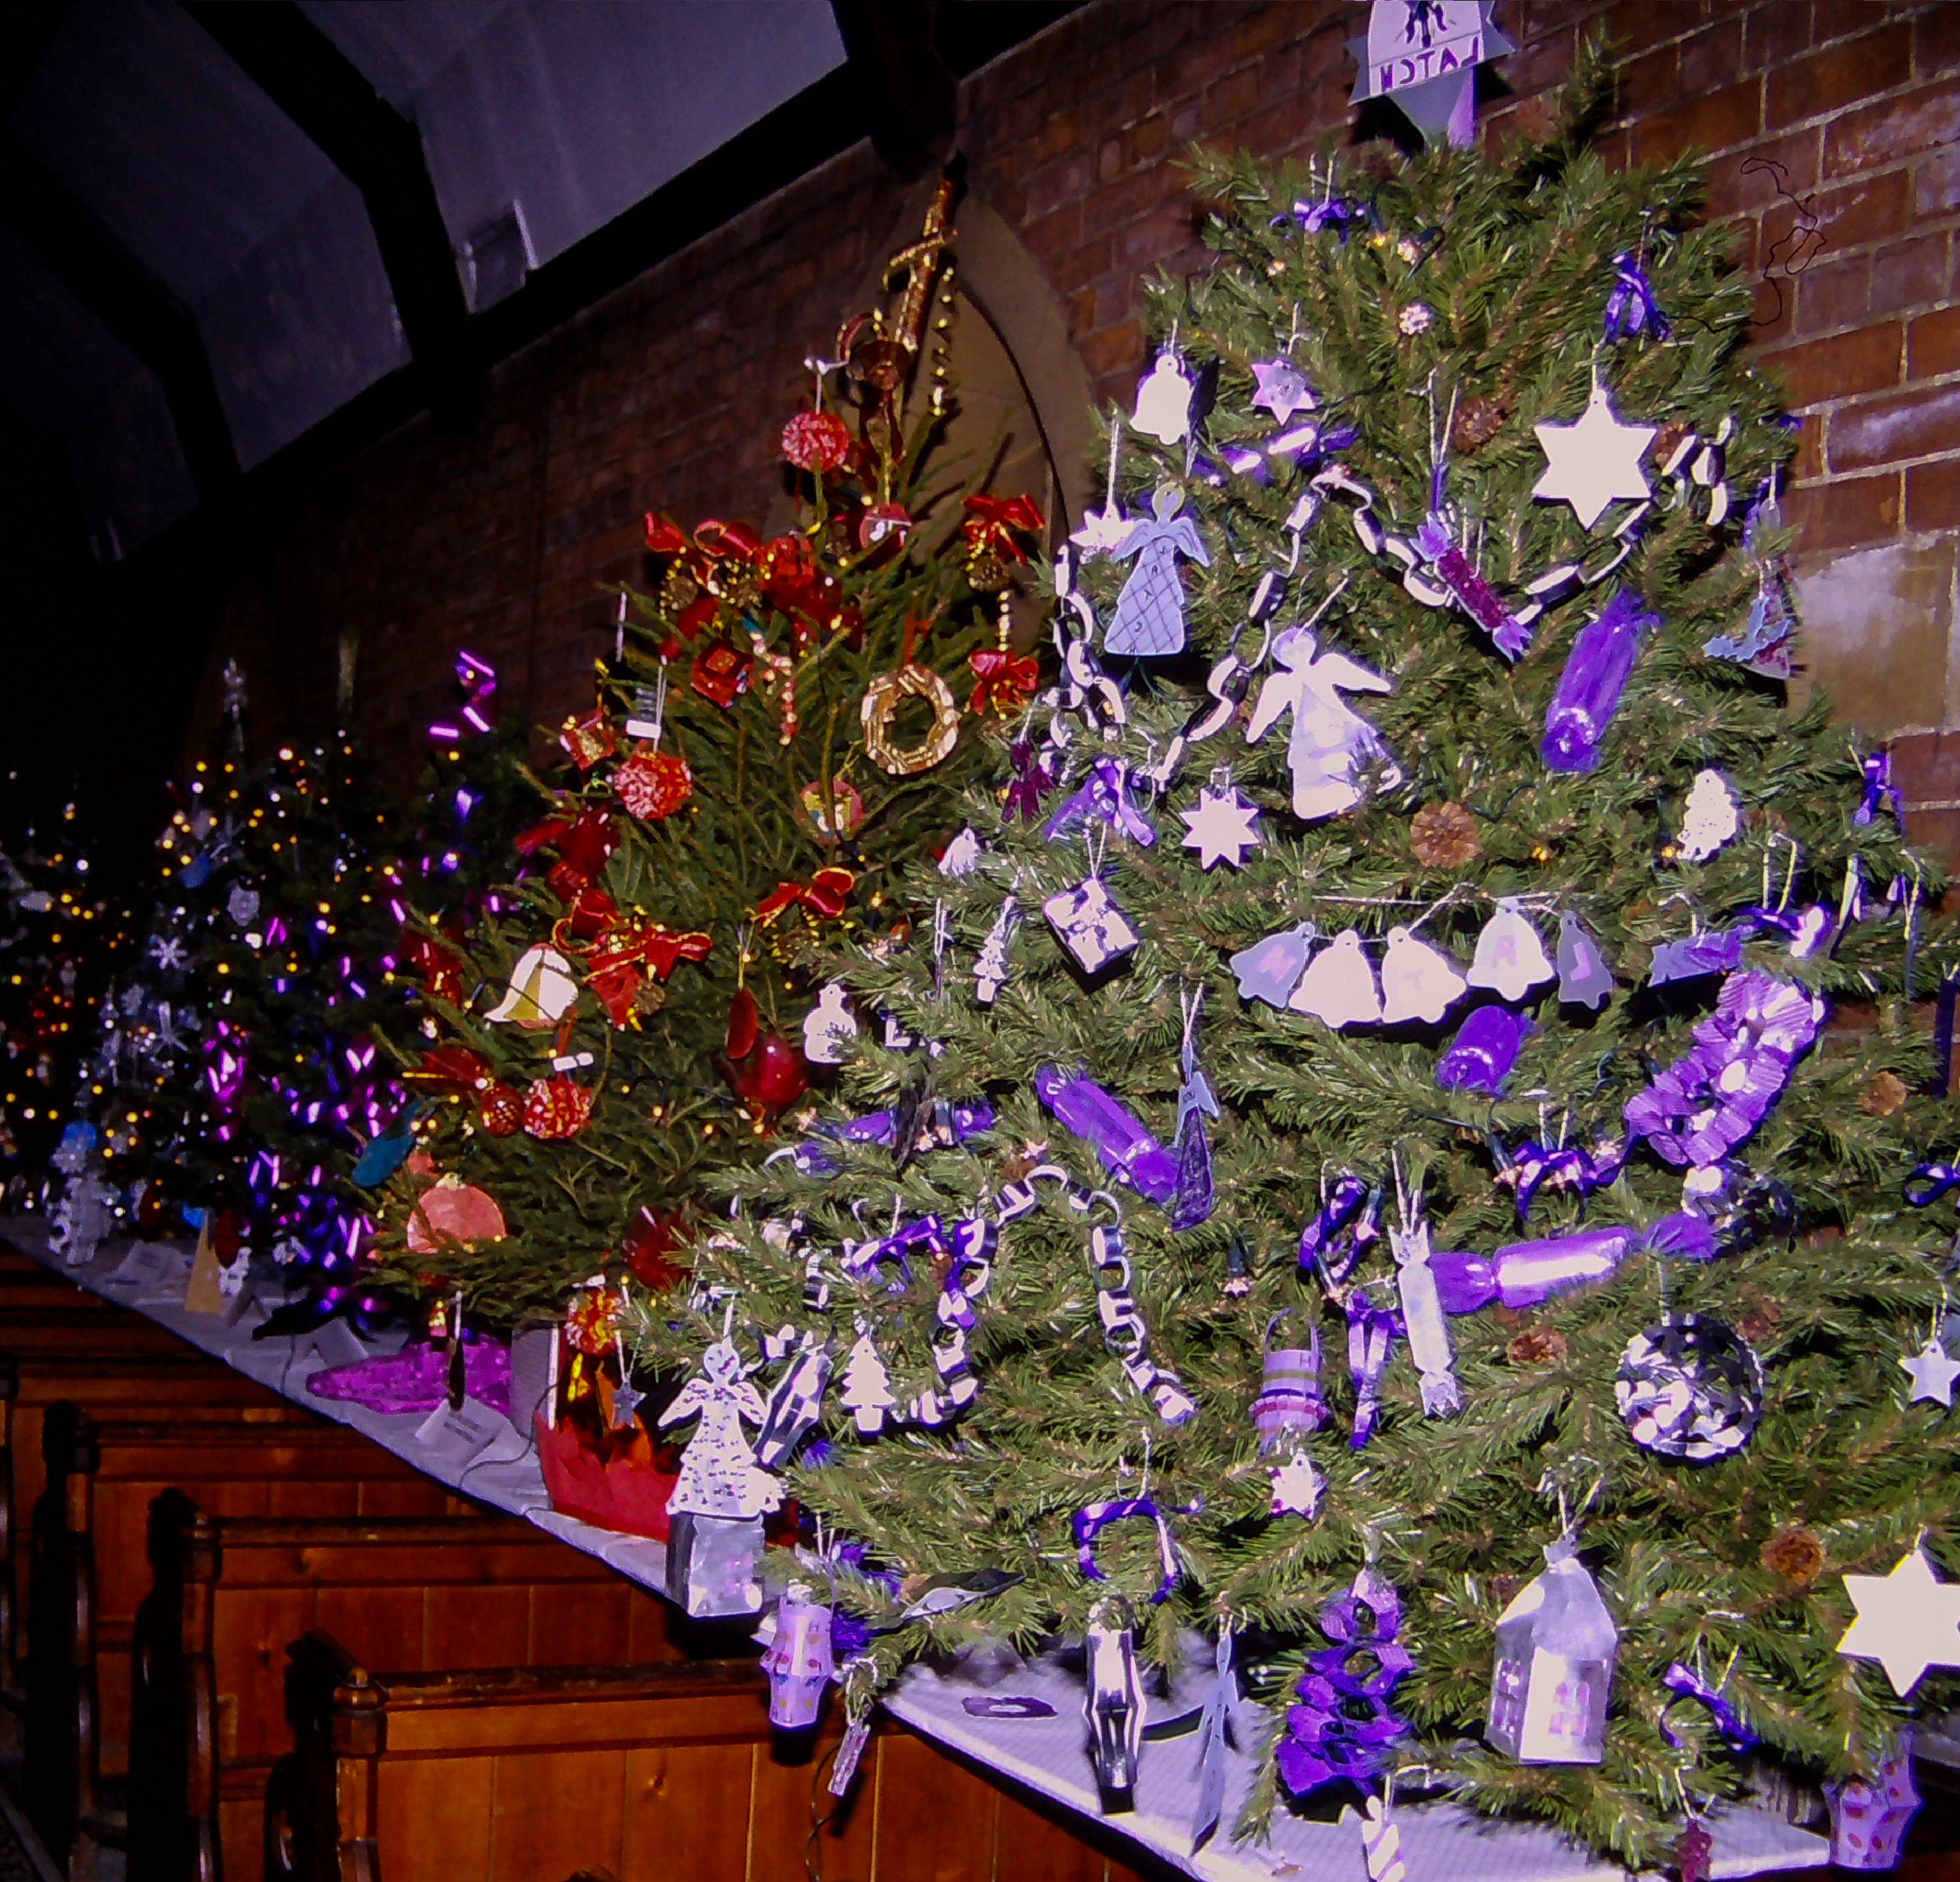 Christmas Trees from previous festivals